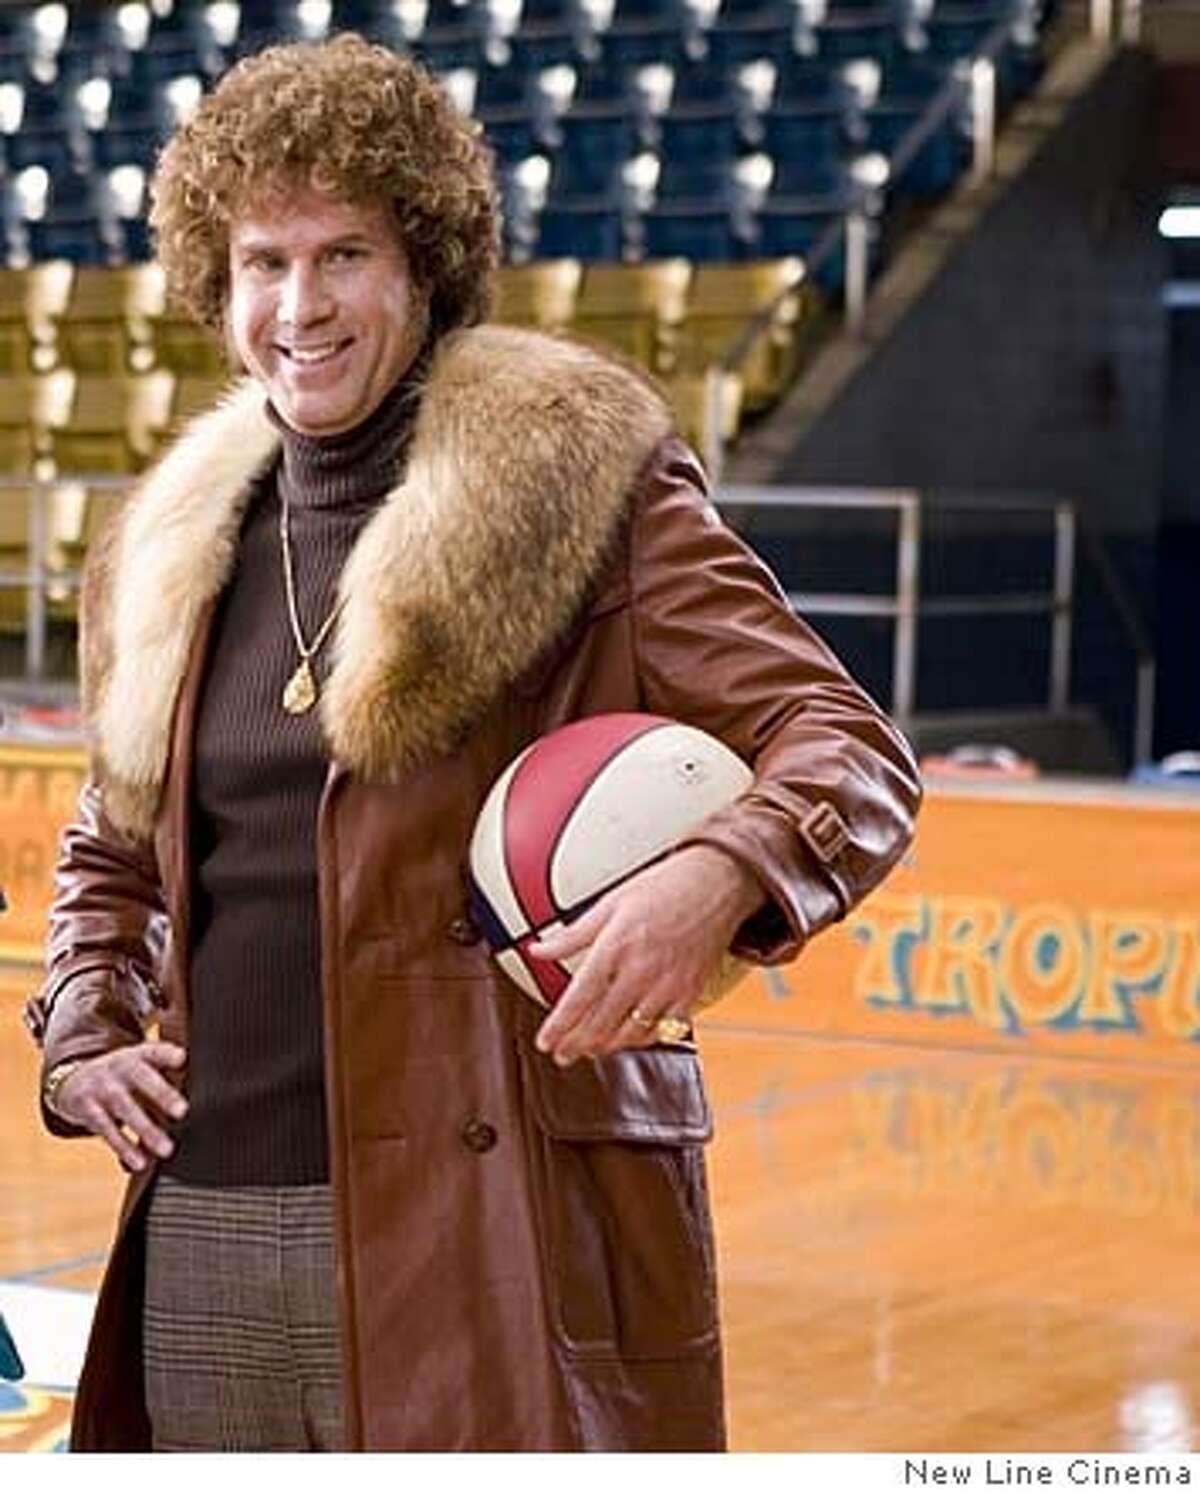 Andrew Daly (left) as Dick Pepperfield and Will Ferrell as Jackie Moon in New Line Cinema's "Semi-Pro" 2008 Semi-Pro , February 16, 2007 Photo by Frank Masi/newline.wireimage.com To license this image (13192841), contact NewLine: U.S. 1-212-686-8900 / U.K. 44-207-868-8940 / Australia 61-2-8262-9222 / Japan: 81-3-5464-7020 1 212-686-8901 (fax) info@wireimage.com (e-mail) NewLine.wireimage.com (web site)